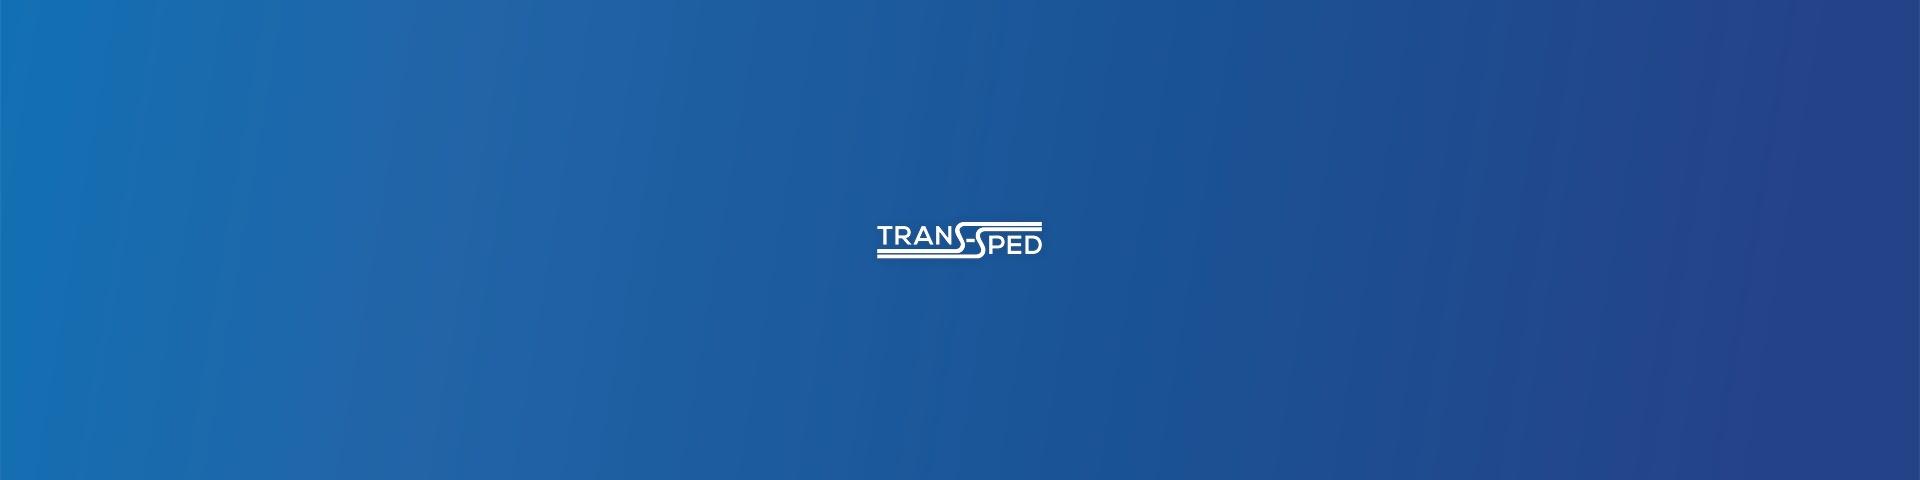 Trans-Sped is at the forefront of maintenance as well